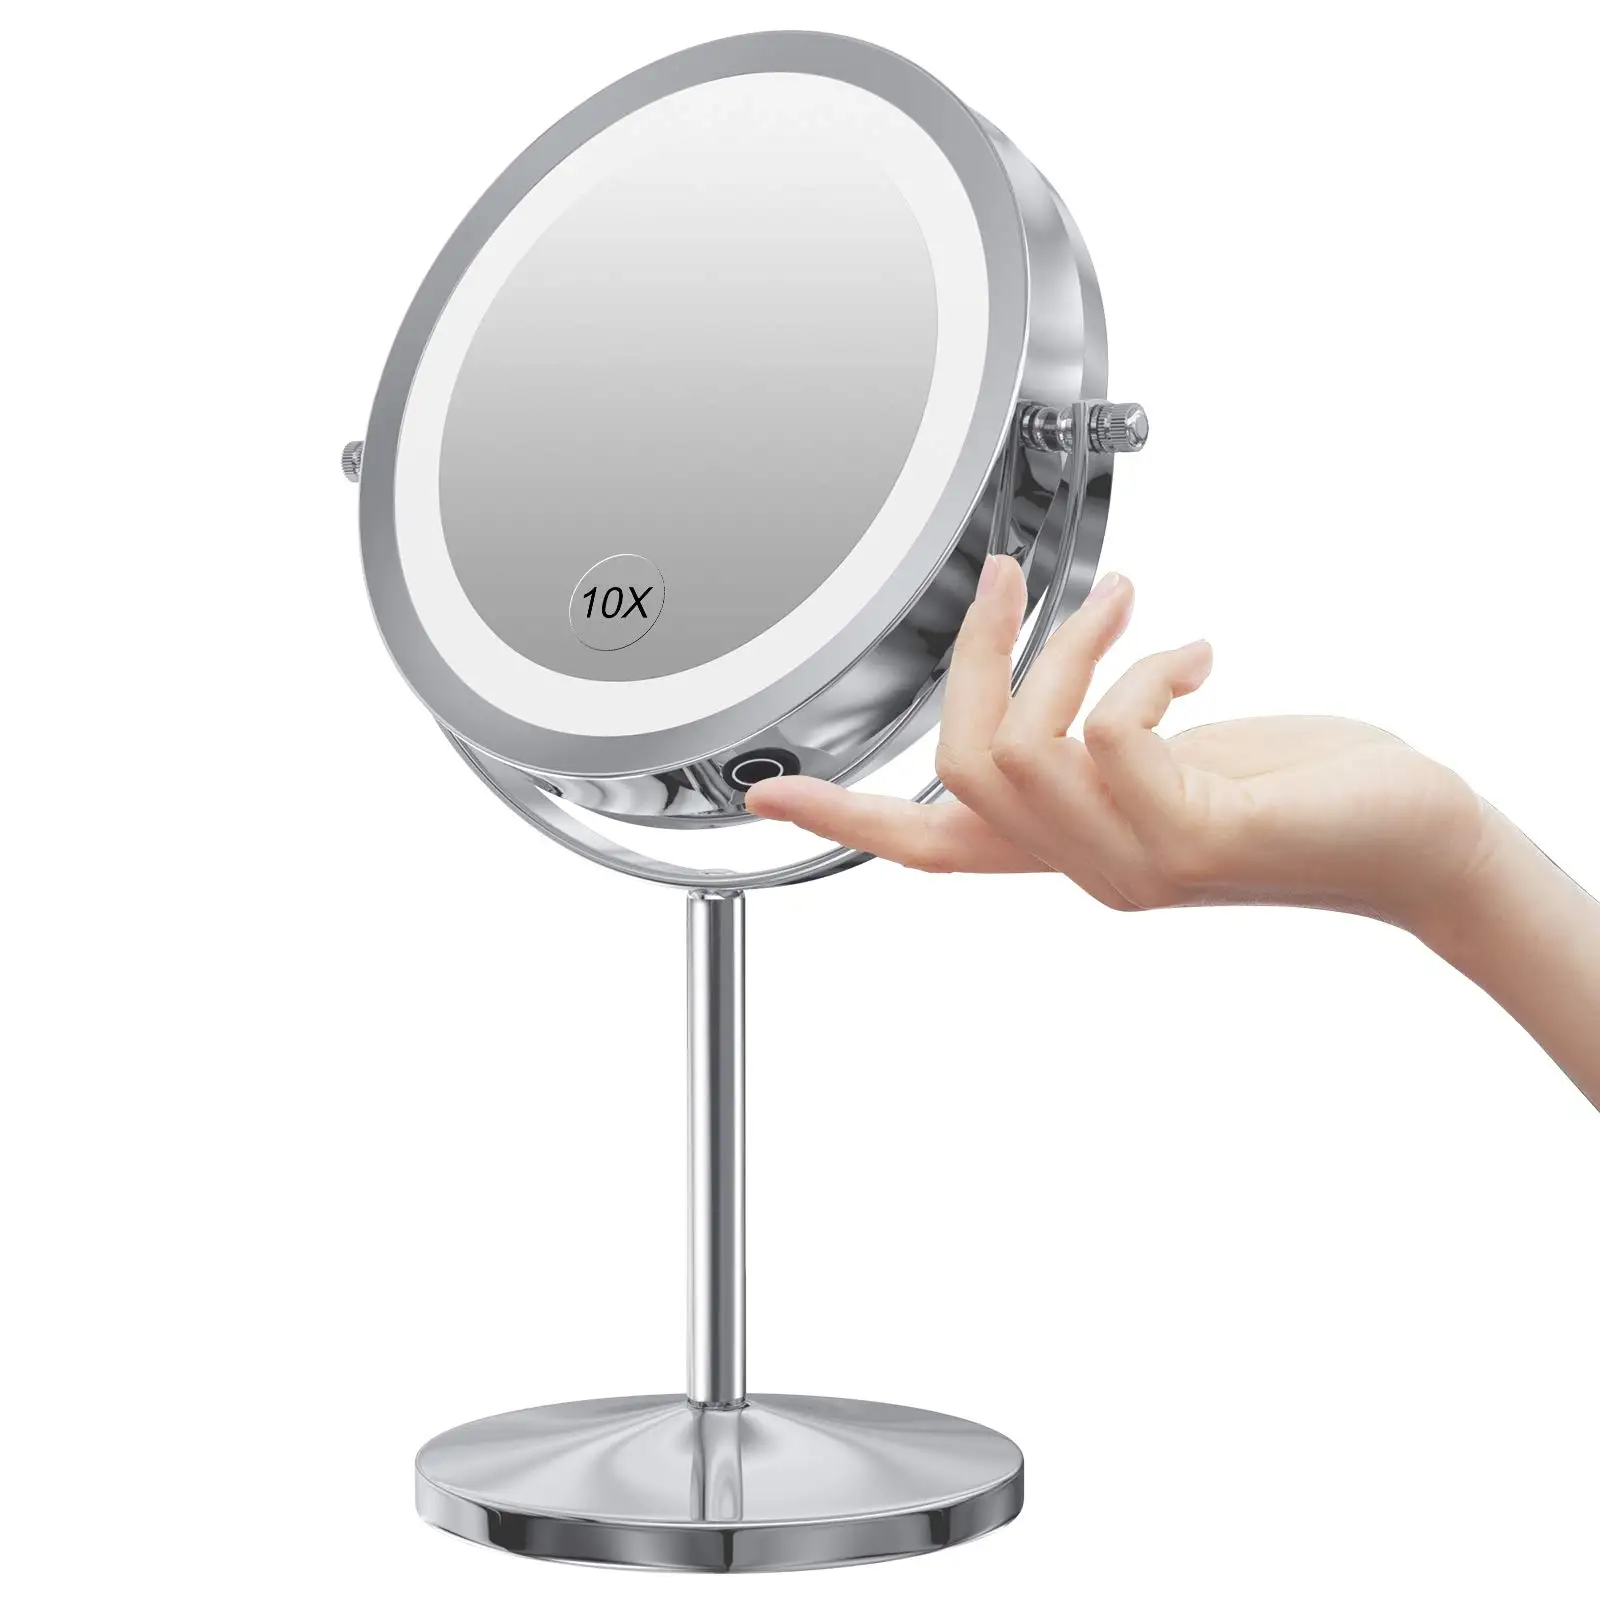 

LED Makeup Mirror with Touch Screen Adjustable LED Light, 7 Inch Lighted Vanity Swivel Mirror 1x/10x Magnifying Double Sided Mir